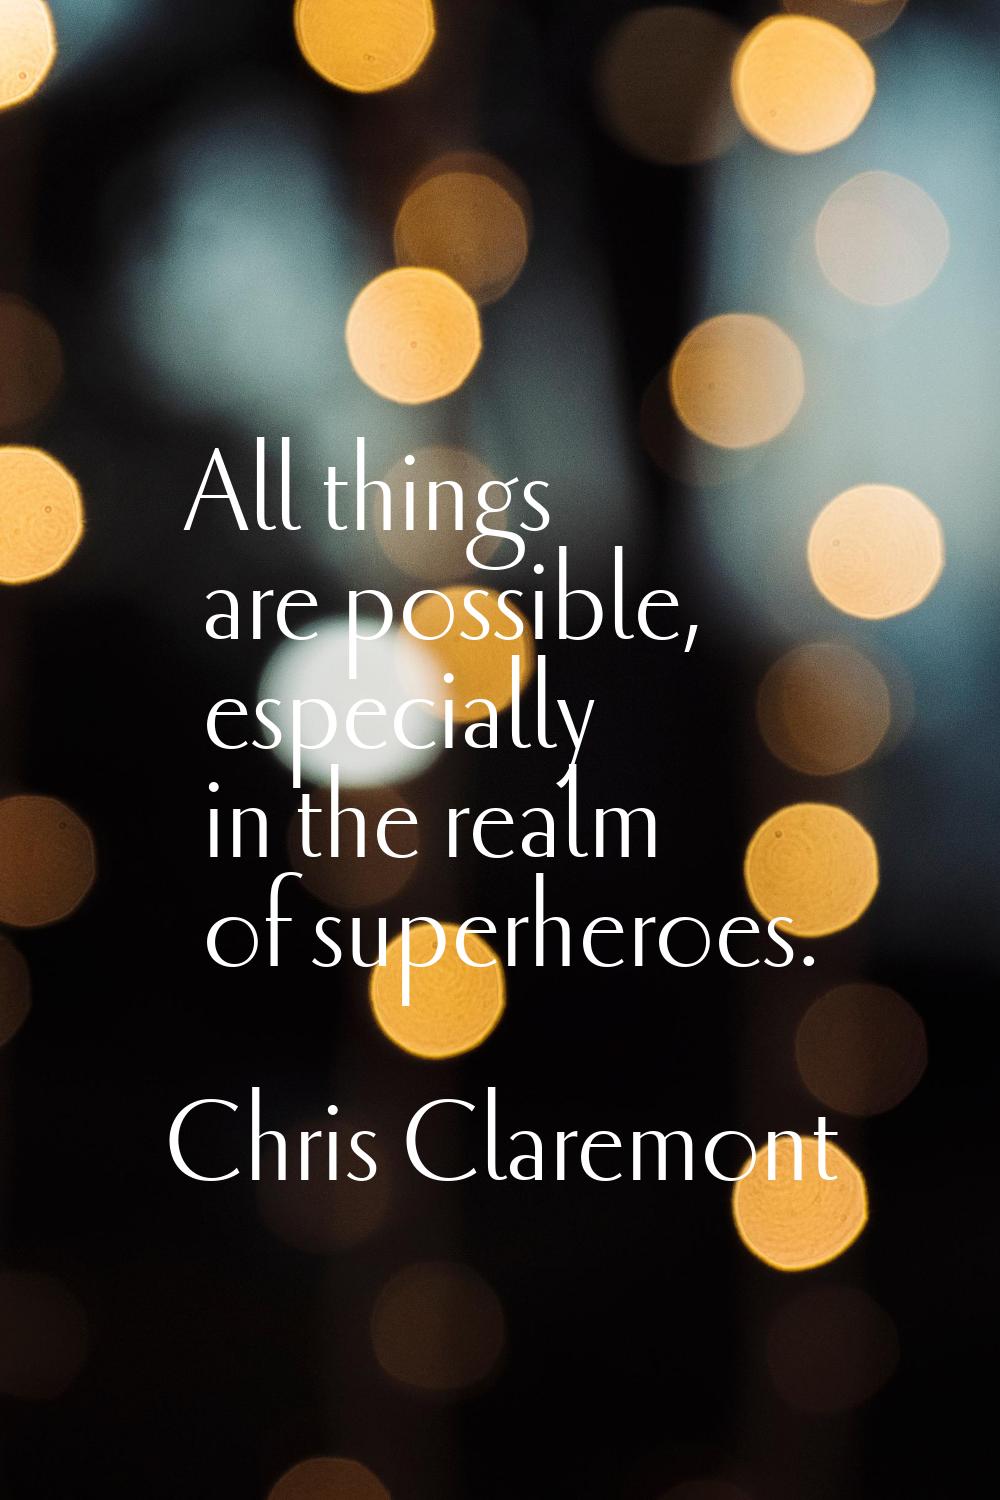 All things are possible, especially in the realm of superheroes.